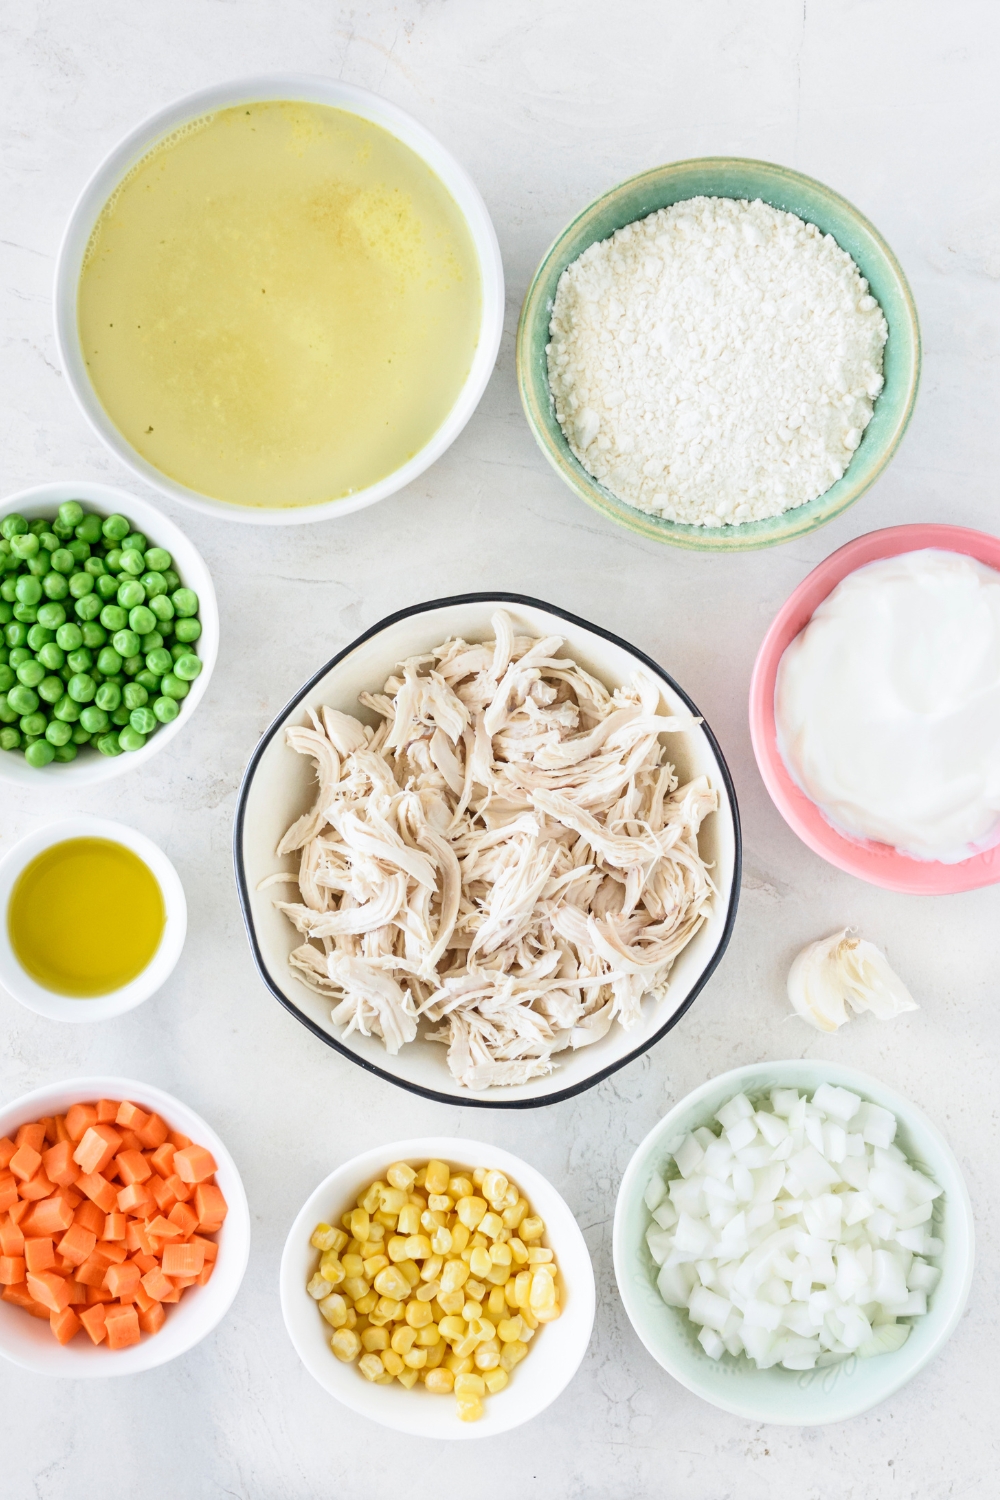 An assortment of ingredients including bowls of cooked and shredded chicken, chicken broth, flour, yogurt, diced onion, diced carrot, corn, peas, and oil.